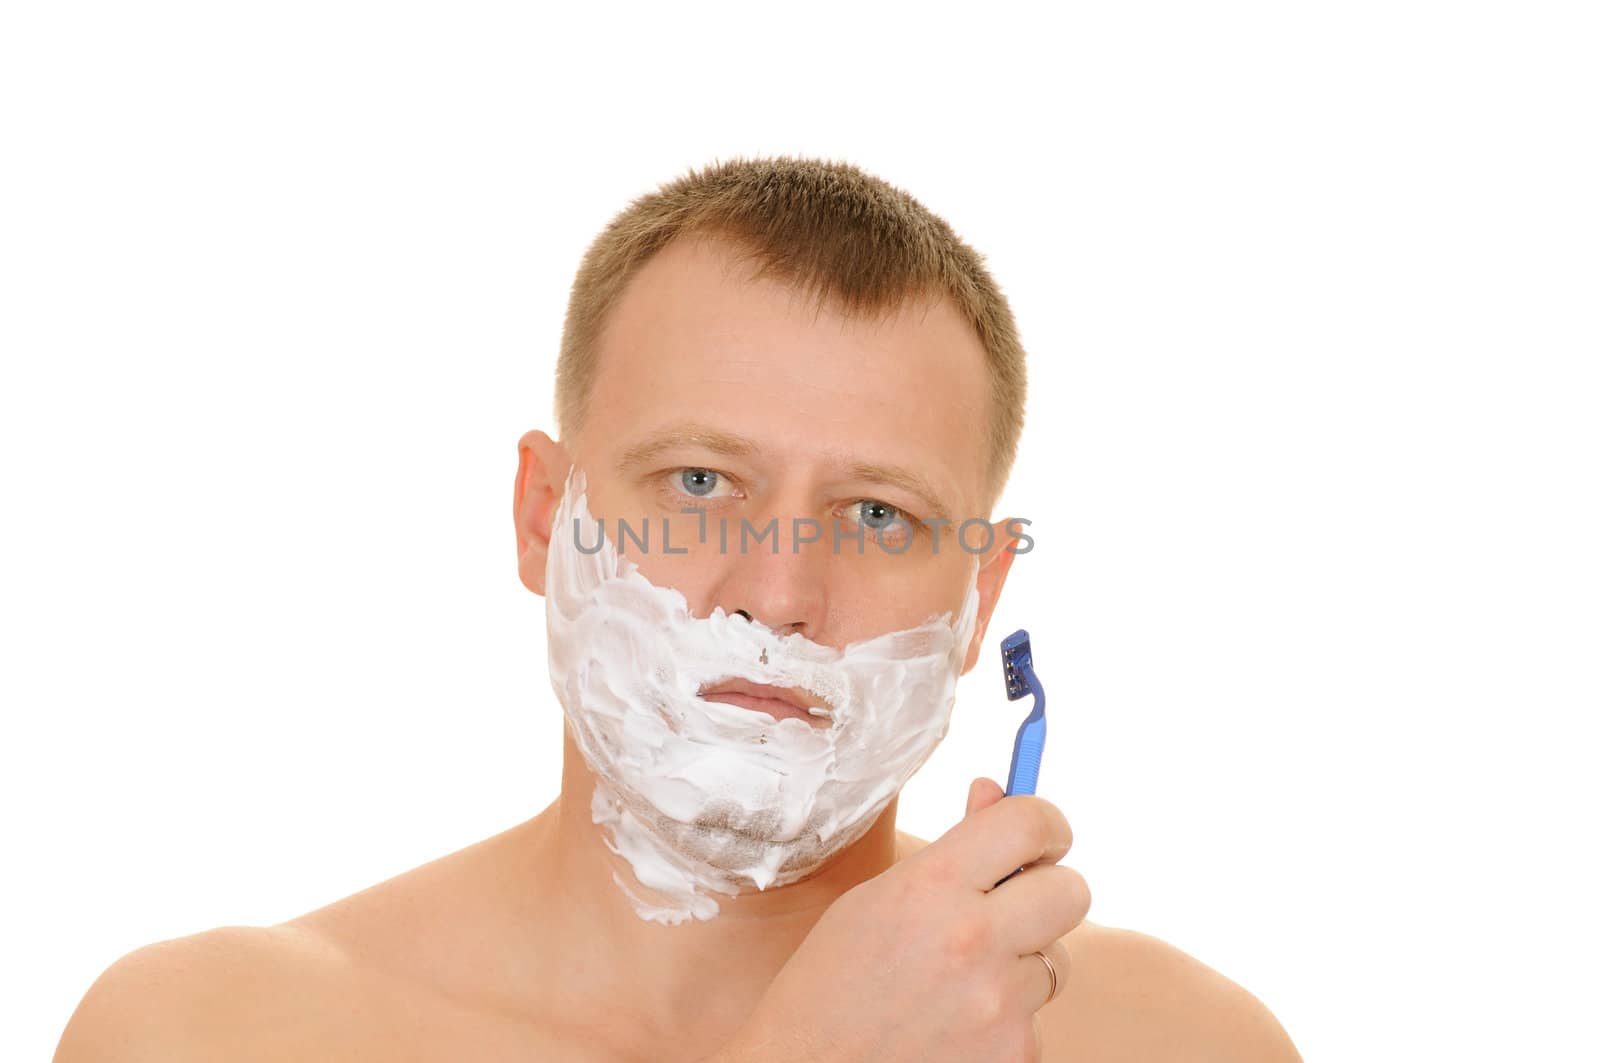 The man has a shave isolated on white background